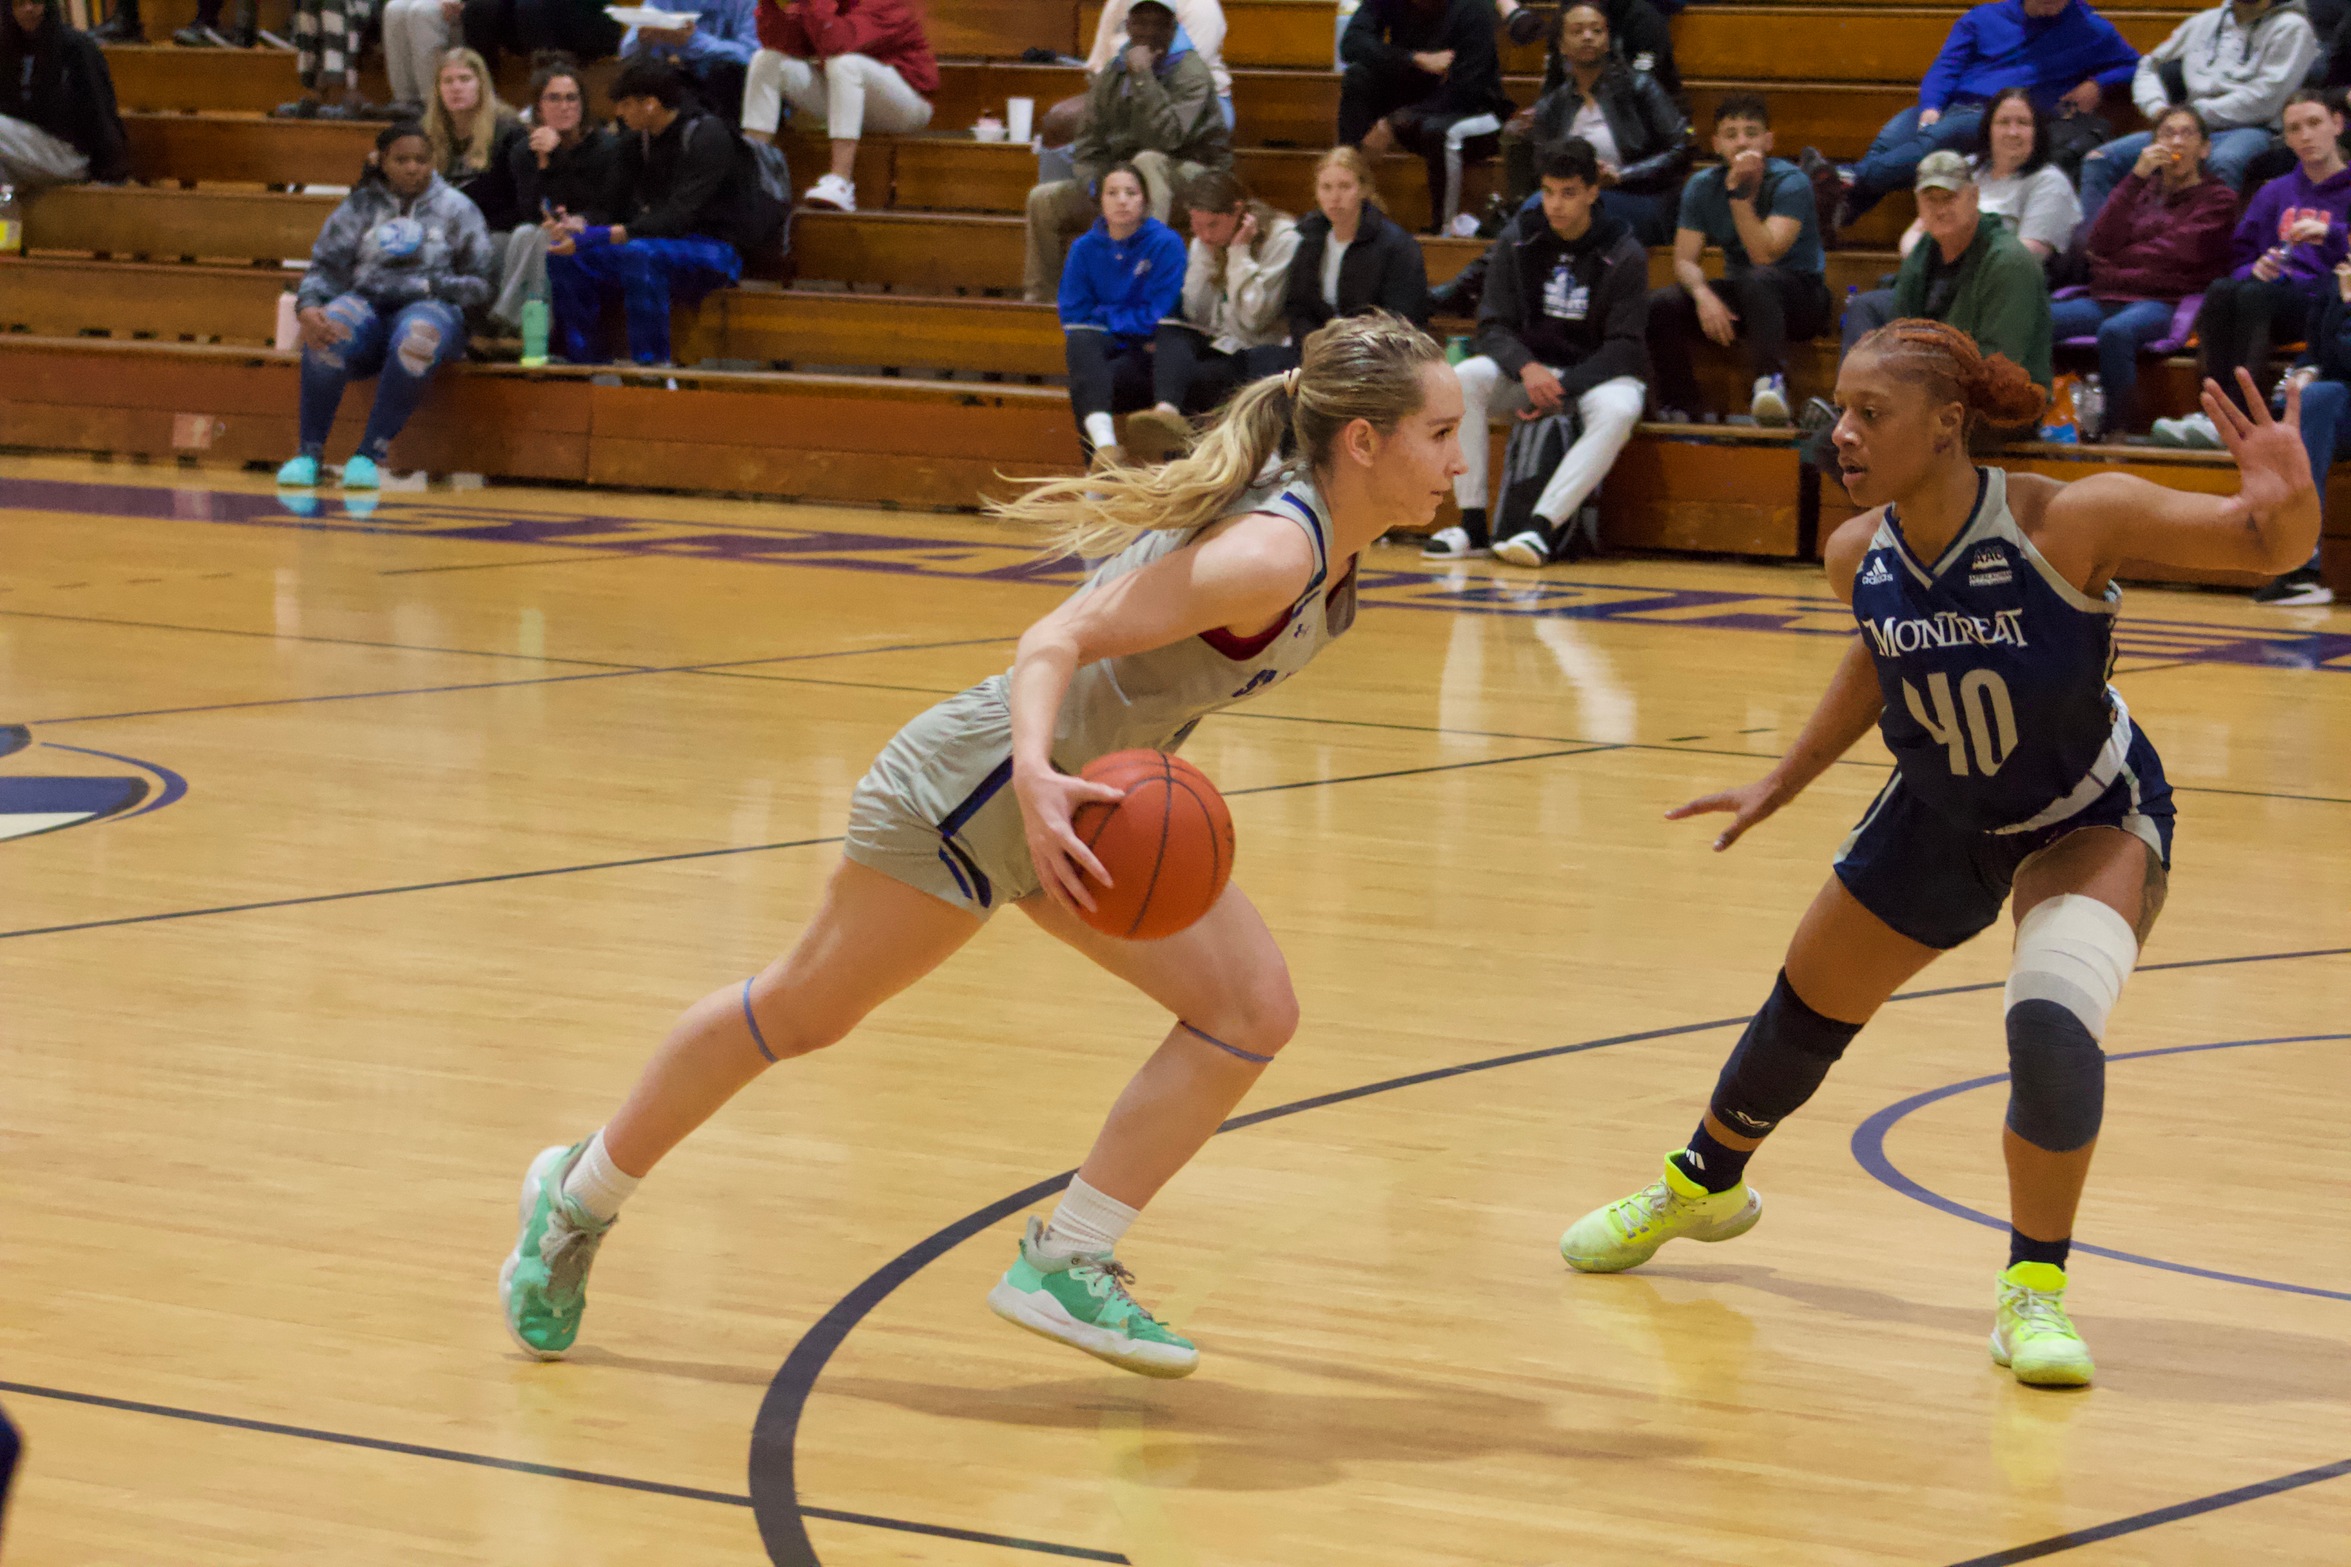 St. Andrews women overpowered by Montreat Cavaliers